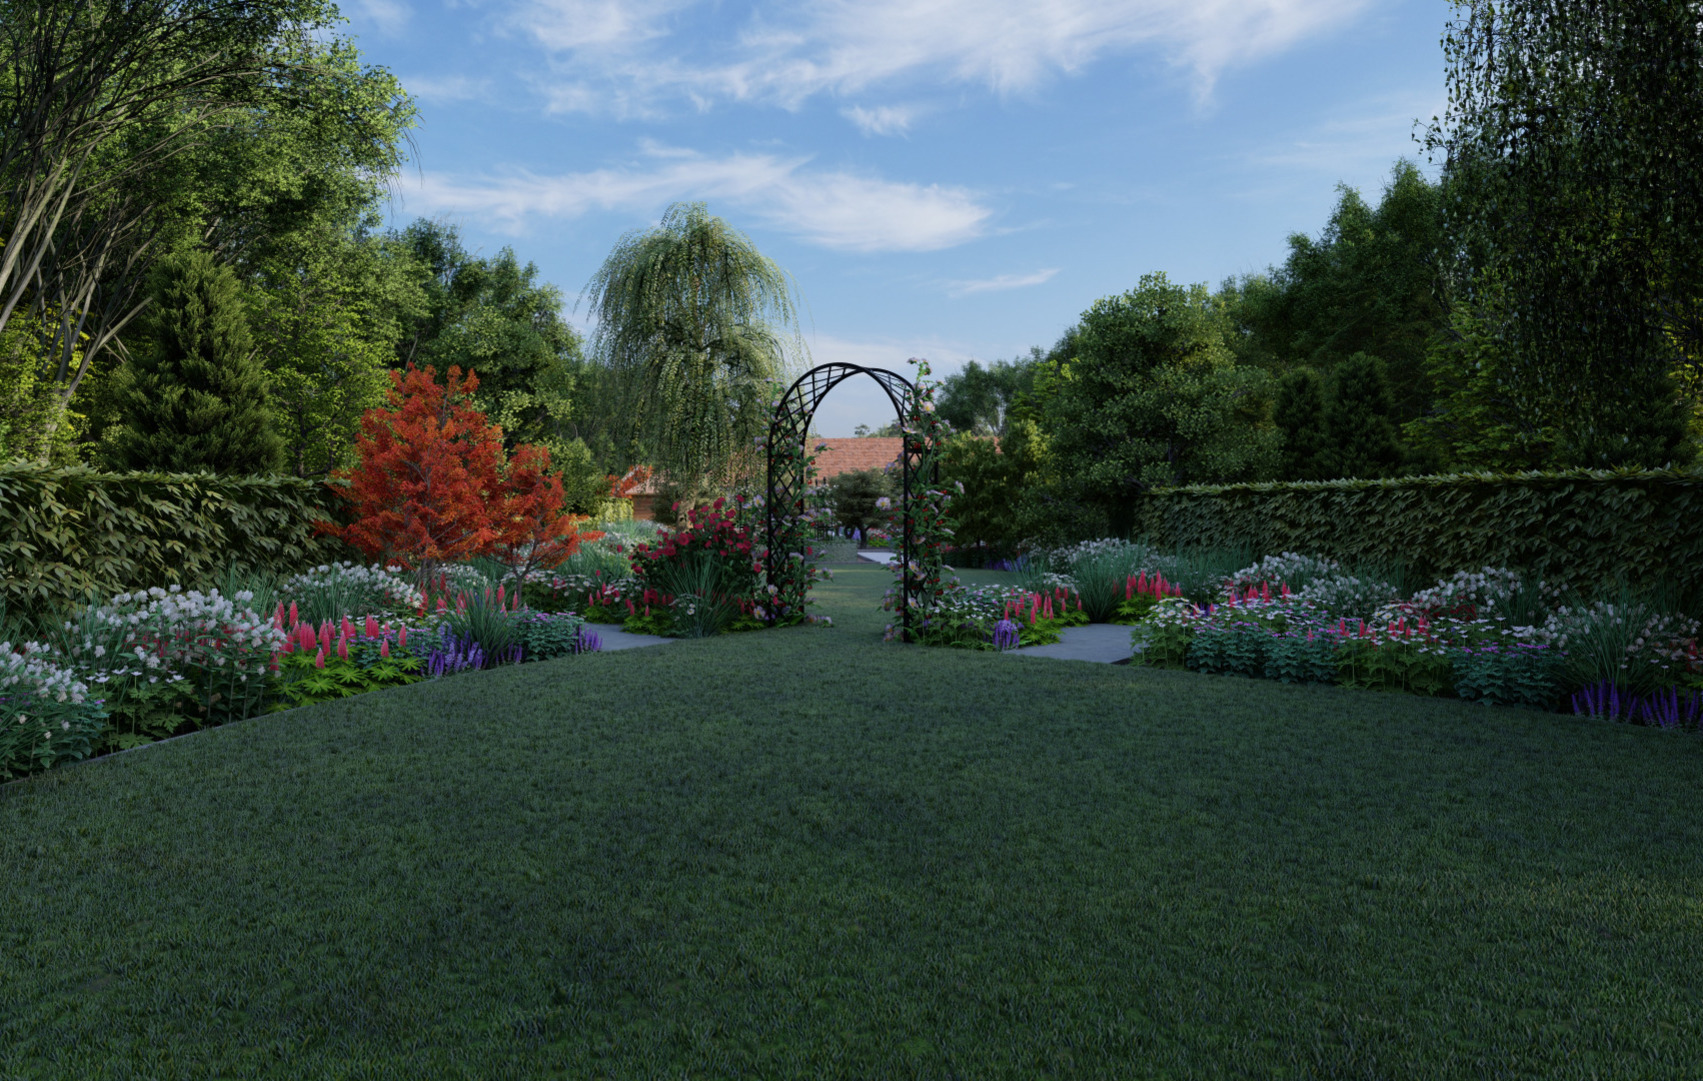 The Bagatelle Rose Arch both a feature and a gateway linking interconnecting lawn areas